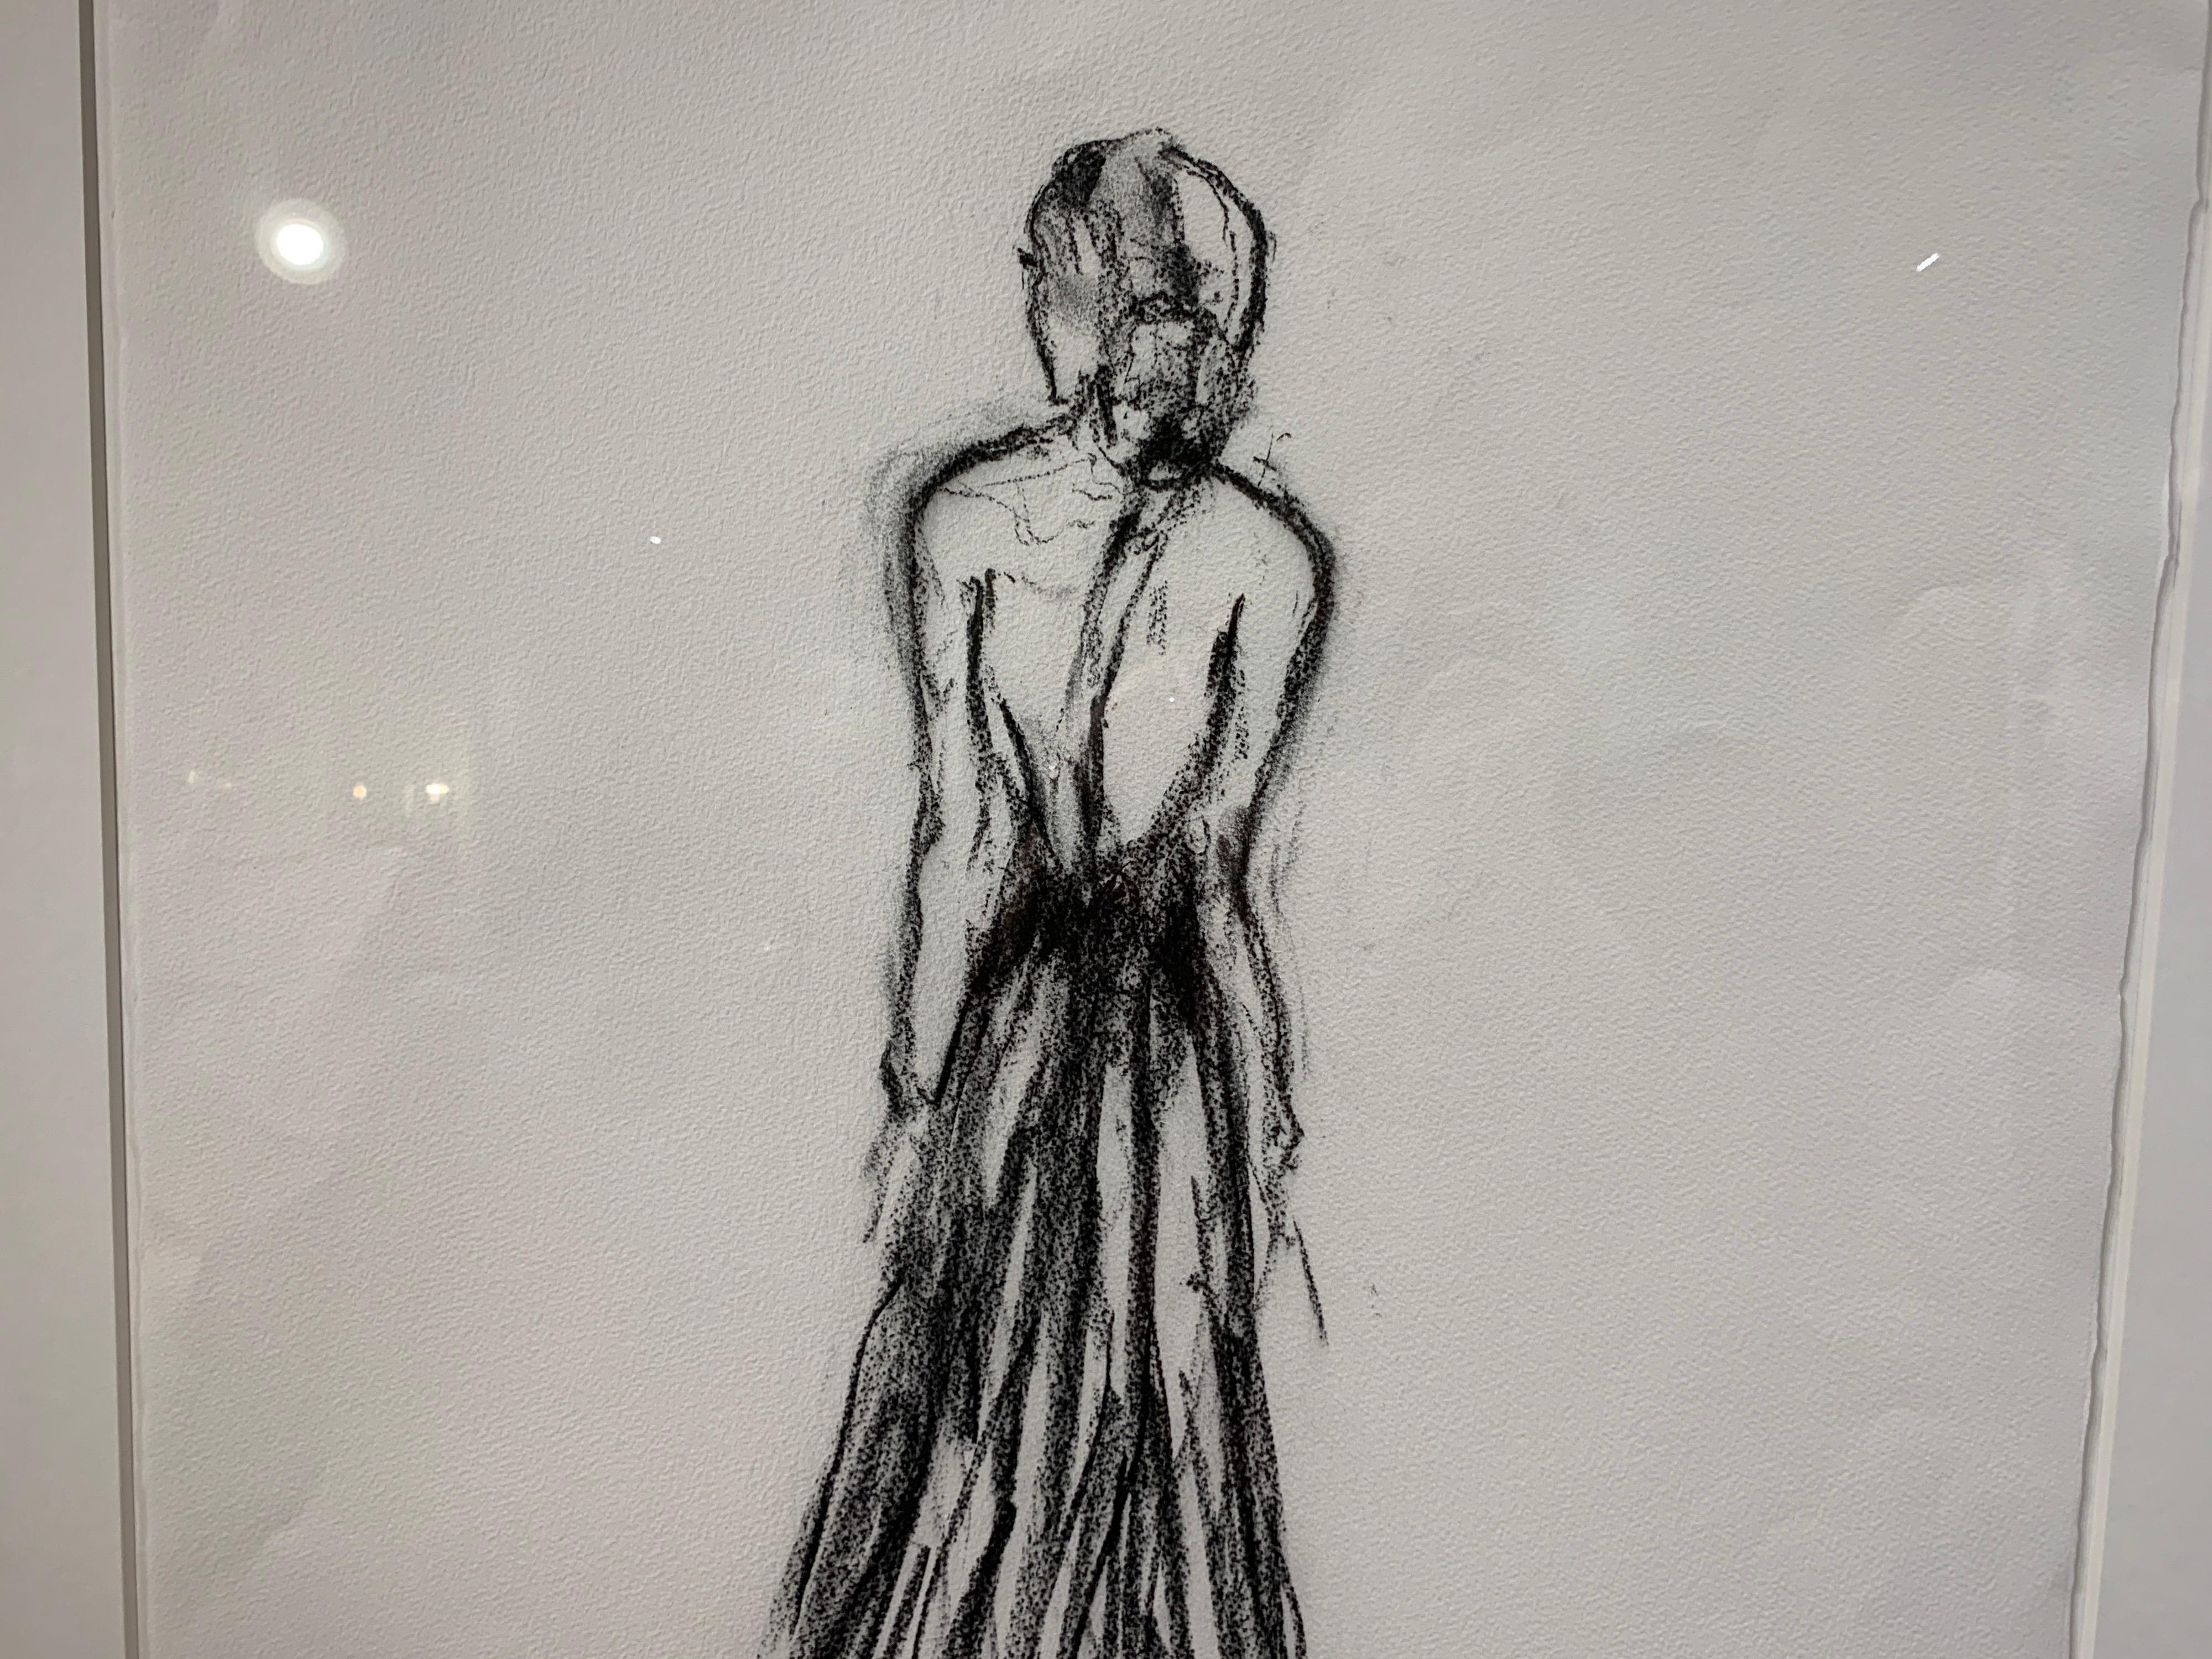 'Lady in Charcoal II' is a vertical framed Impressionist charcoal on paper black and white drawing created by American artist Bonnie Beauchamp-Cooke in 2019. Featuring a sketch in charcoal, the painting depicts an elegant lady wearing a mesmerizing